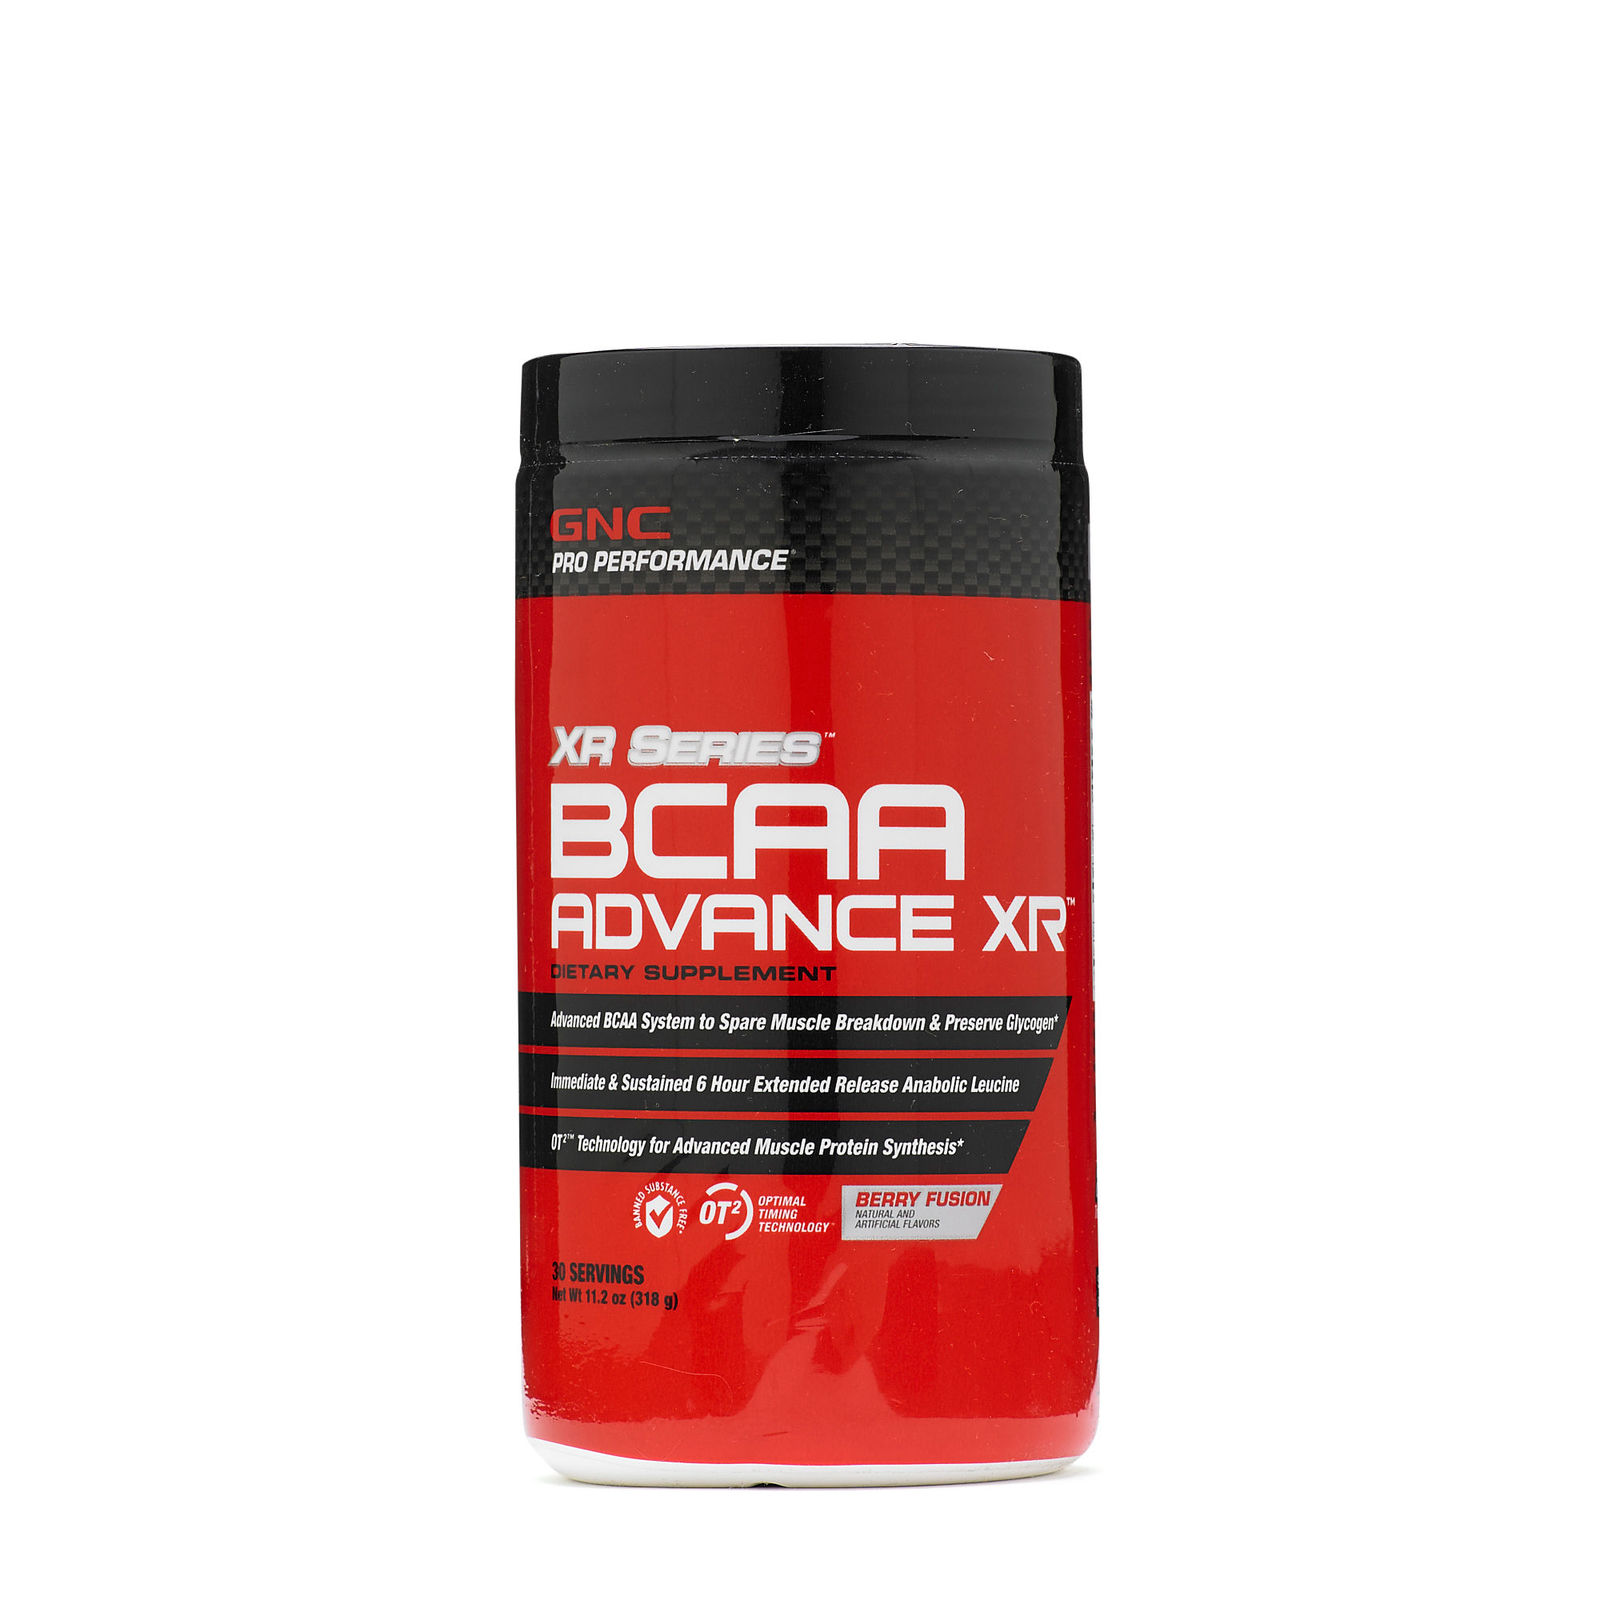 Primary image for GNC Performance XR Series BCAA Advance XR (Berry Fusion) 30 servings 11.2 oz. NW